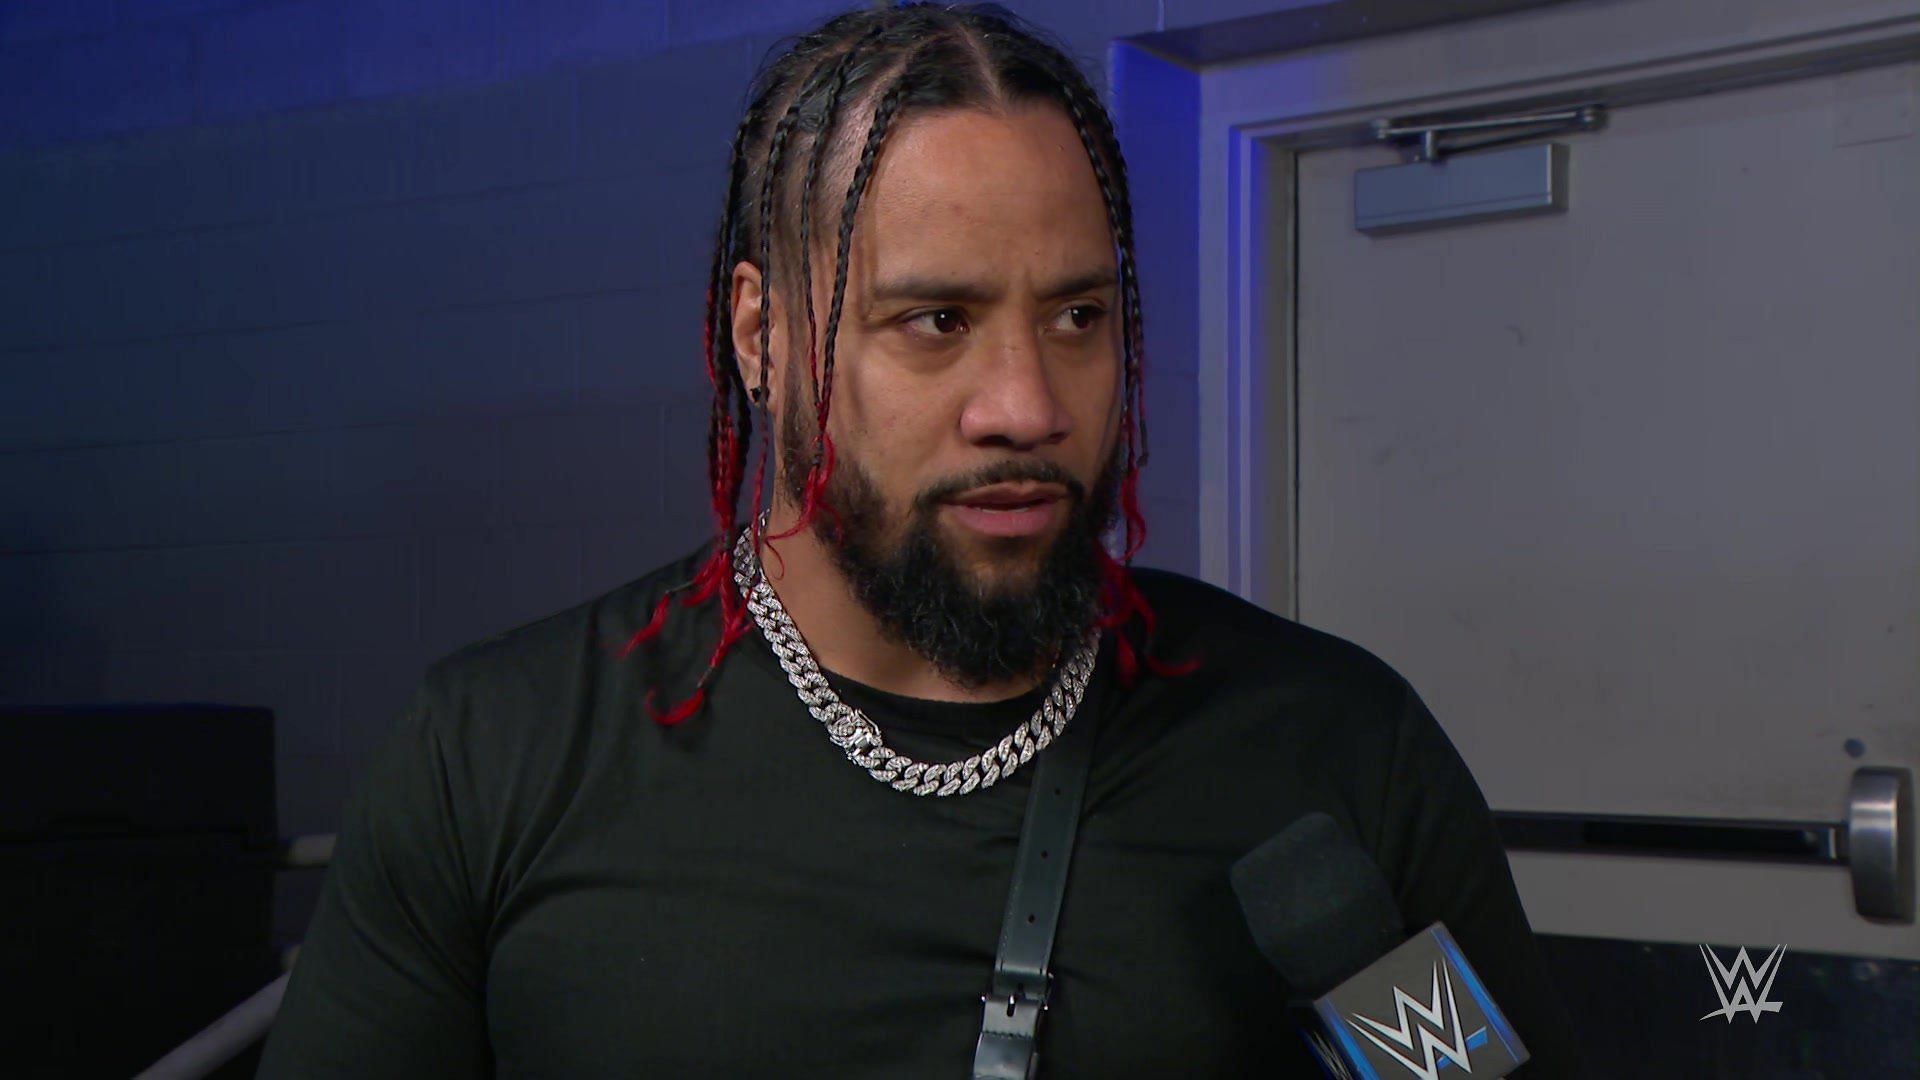 Jimmy Uso on SmackDown